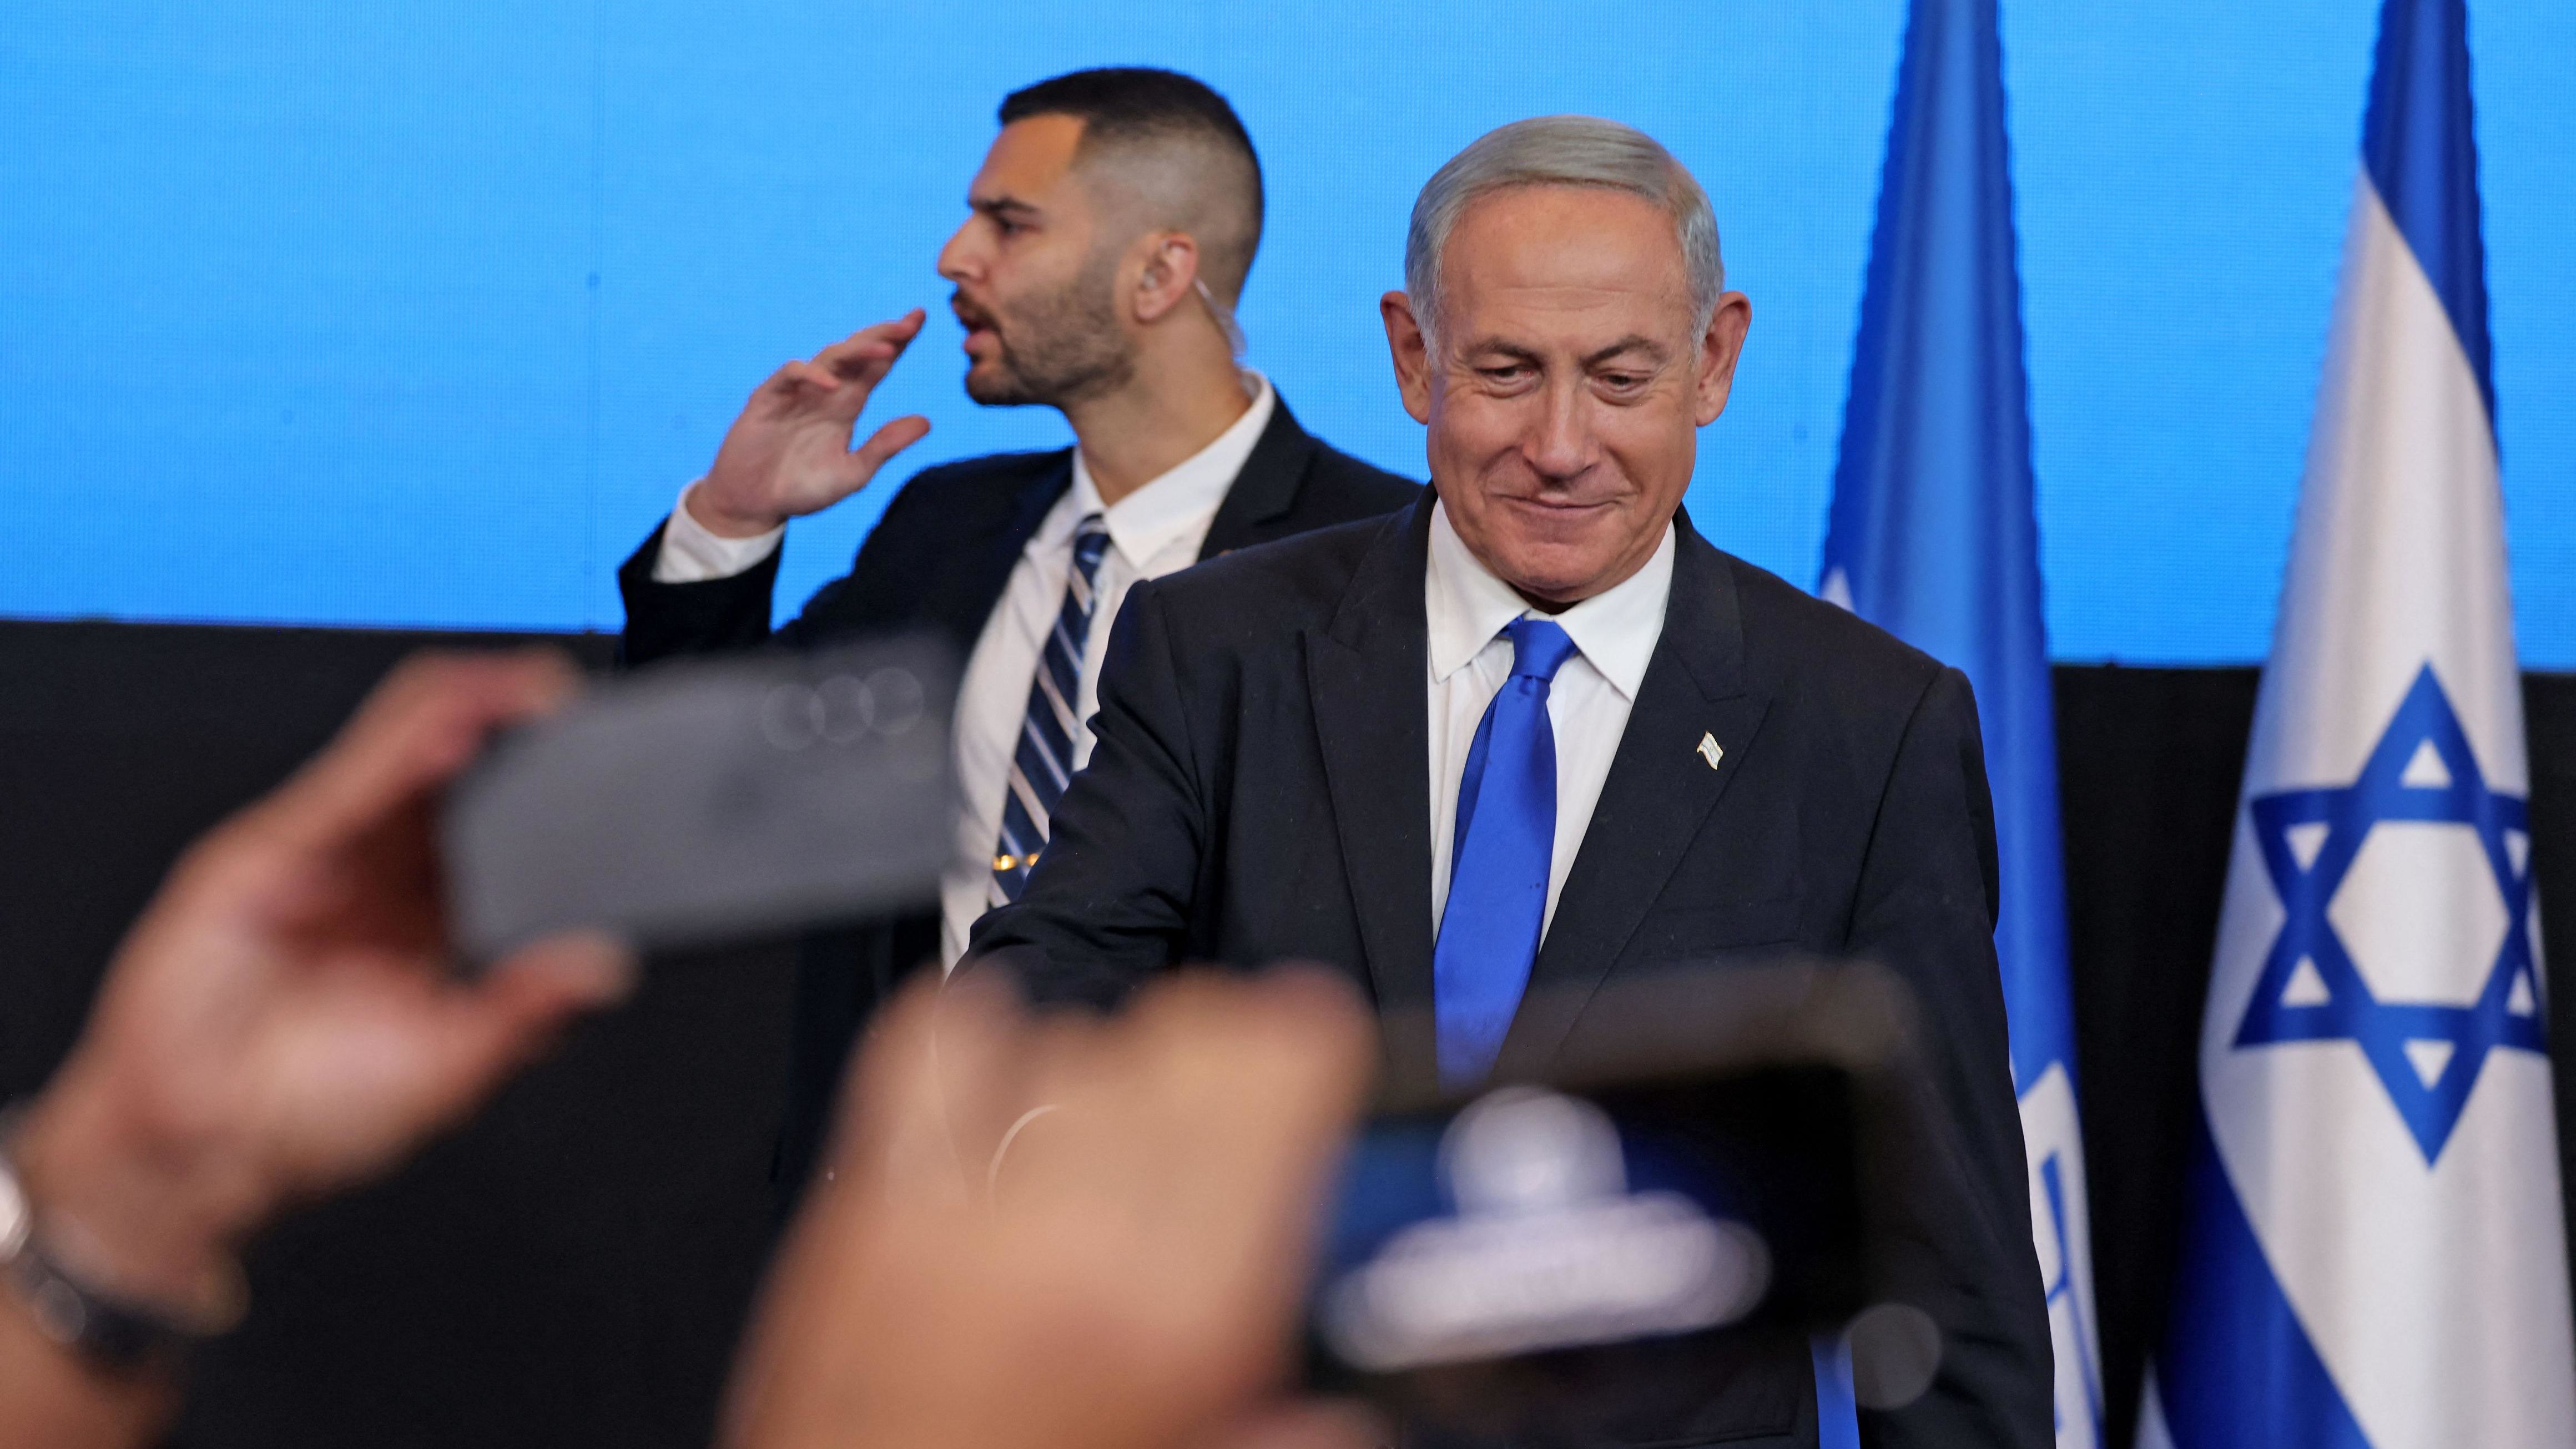 <a href="https://www.cnn.com/2021/05/31/middleeast/gallery/benjamin-netanyahu/index.html" target="_blank">Benjamin Netanyahu</a> addresses supporters at his campaign headquarters in Jerusalem on Wednesday, November 2. Israeli Prime Minister Yair Lapid called Netanyahu to congratulate him on <a href="https://www.cnn.com/2022/11/01/middleeast/israel-election-intl" target="_blank">winning Israel's elections</a>, the prime minister's office announced Thursday, just under 48 hours after polls closed.